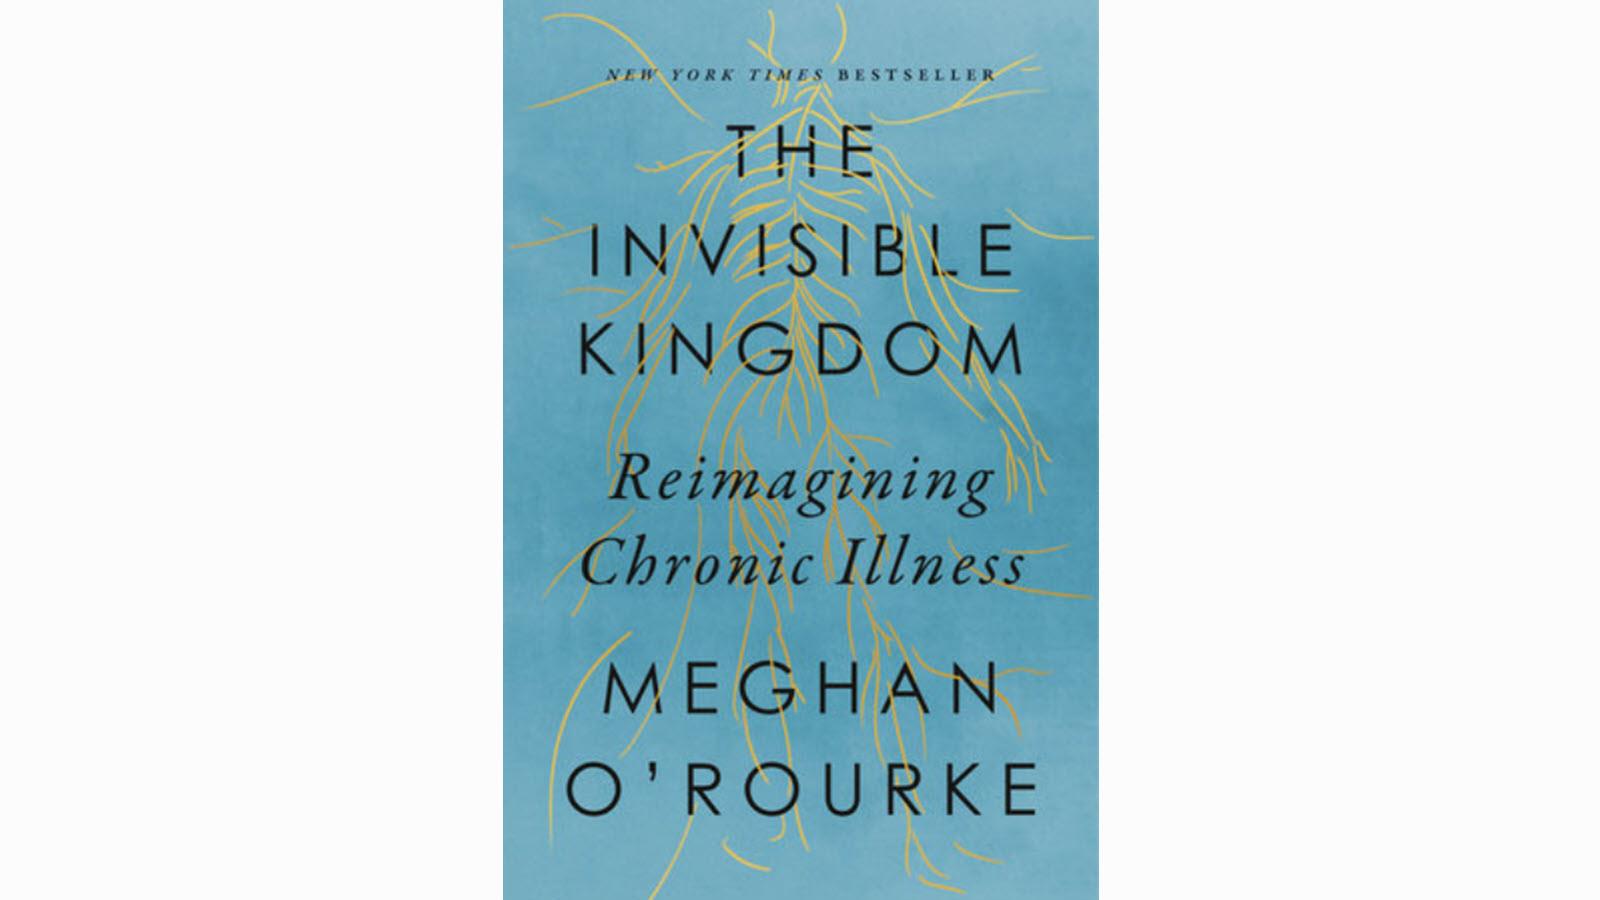 Blue book cover - The Invisible Kingdom - Reimagining Chronic Illness by Meghan O'Rourke